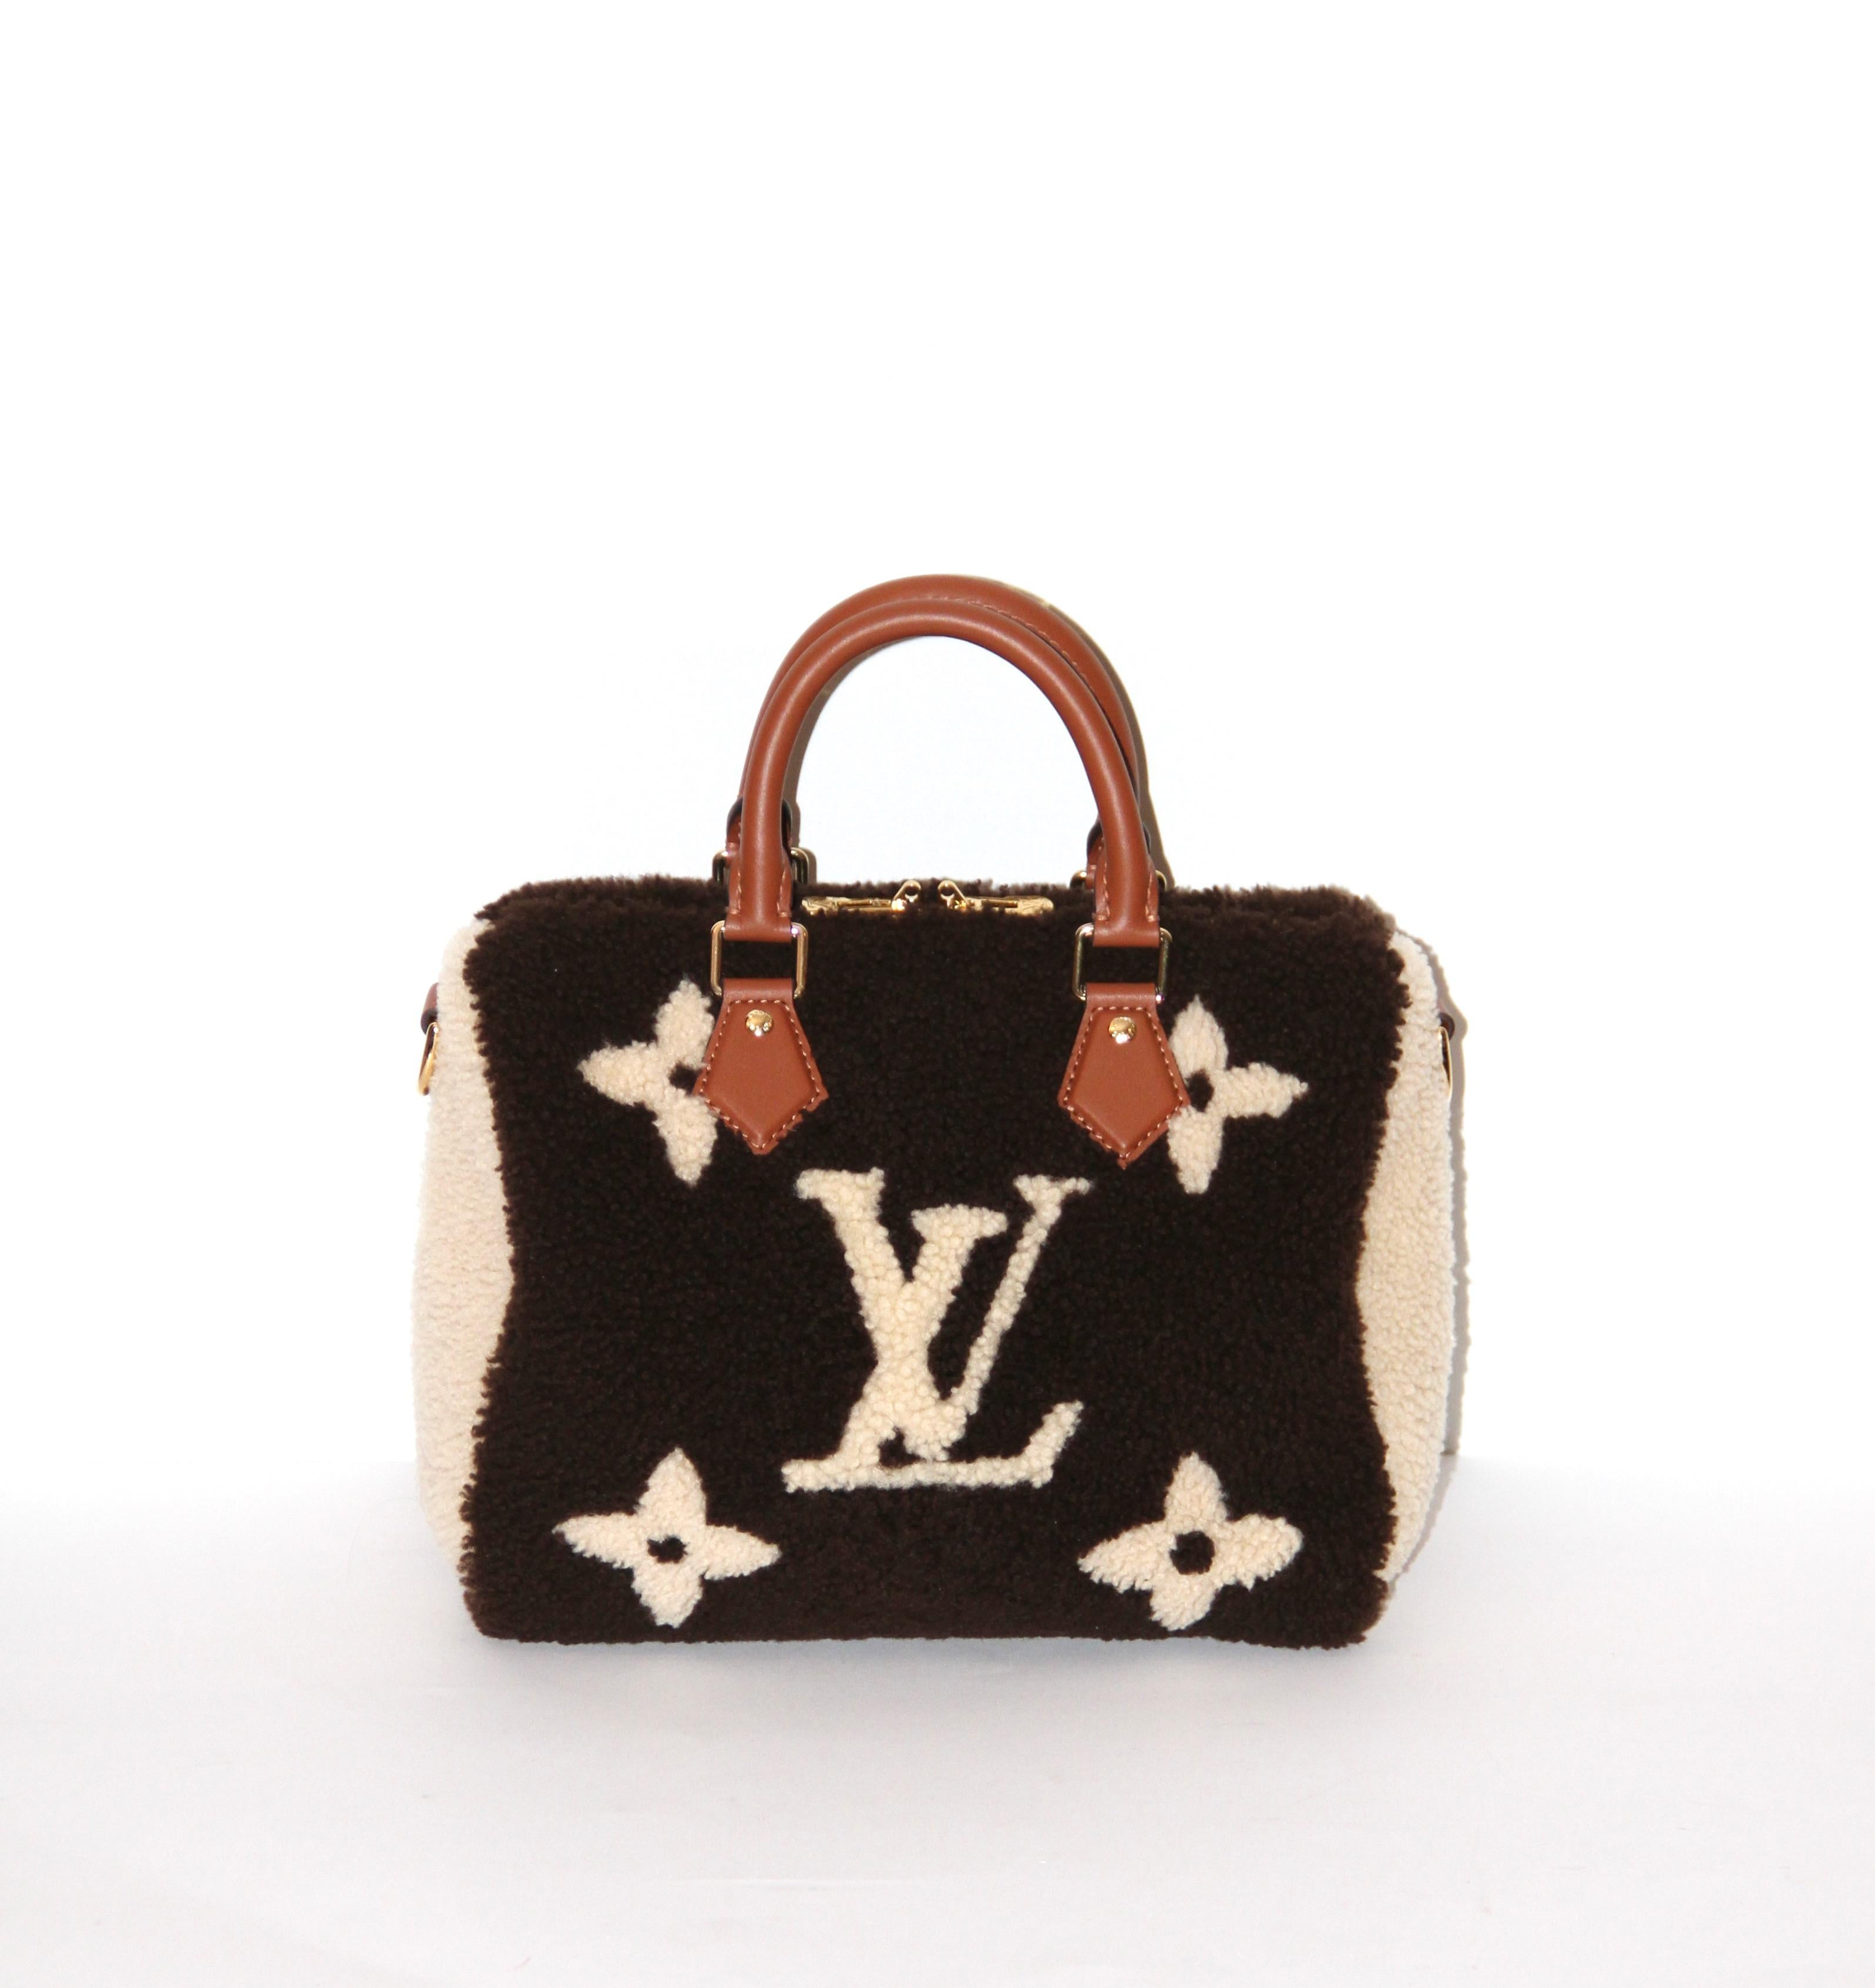 This pre-owned Speedy Bandouliere 25 emblematic of Louis Vuitton offers a chic look for this limited edition LV Teddy Monogram.  
It features a giant shearling monogram, brown calfskin trim and top handles.
An adjustable and removable leather